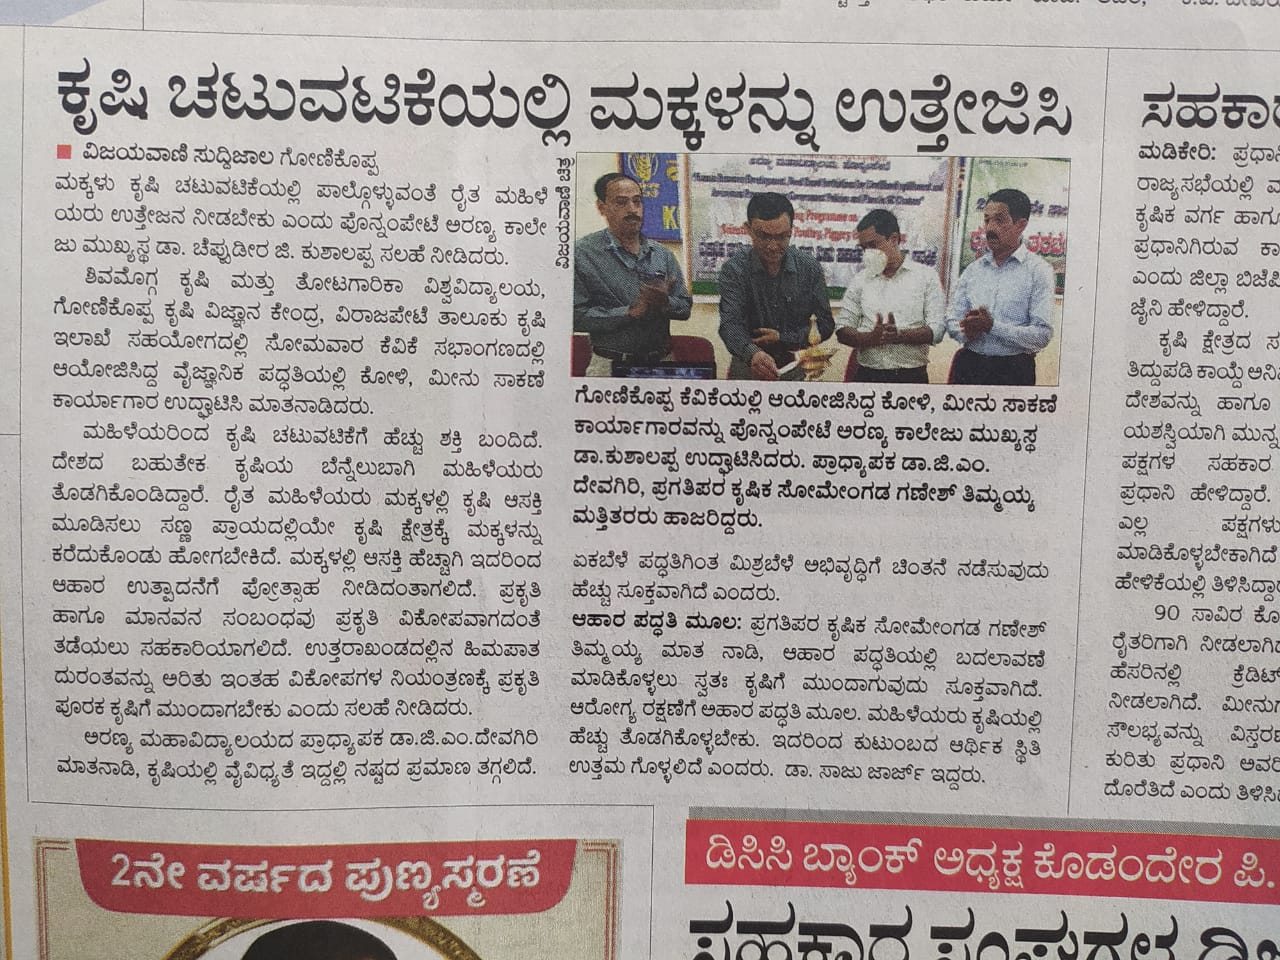 Poultry & fisheries program organised at KVK. Dr. CG Kushalappa urged farmers to take up agriculture